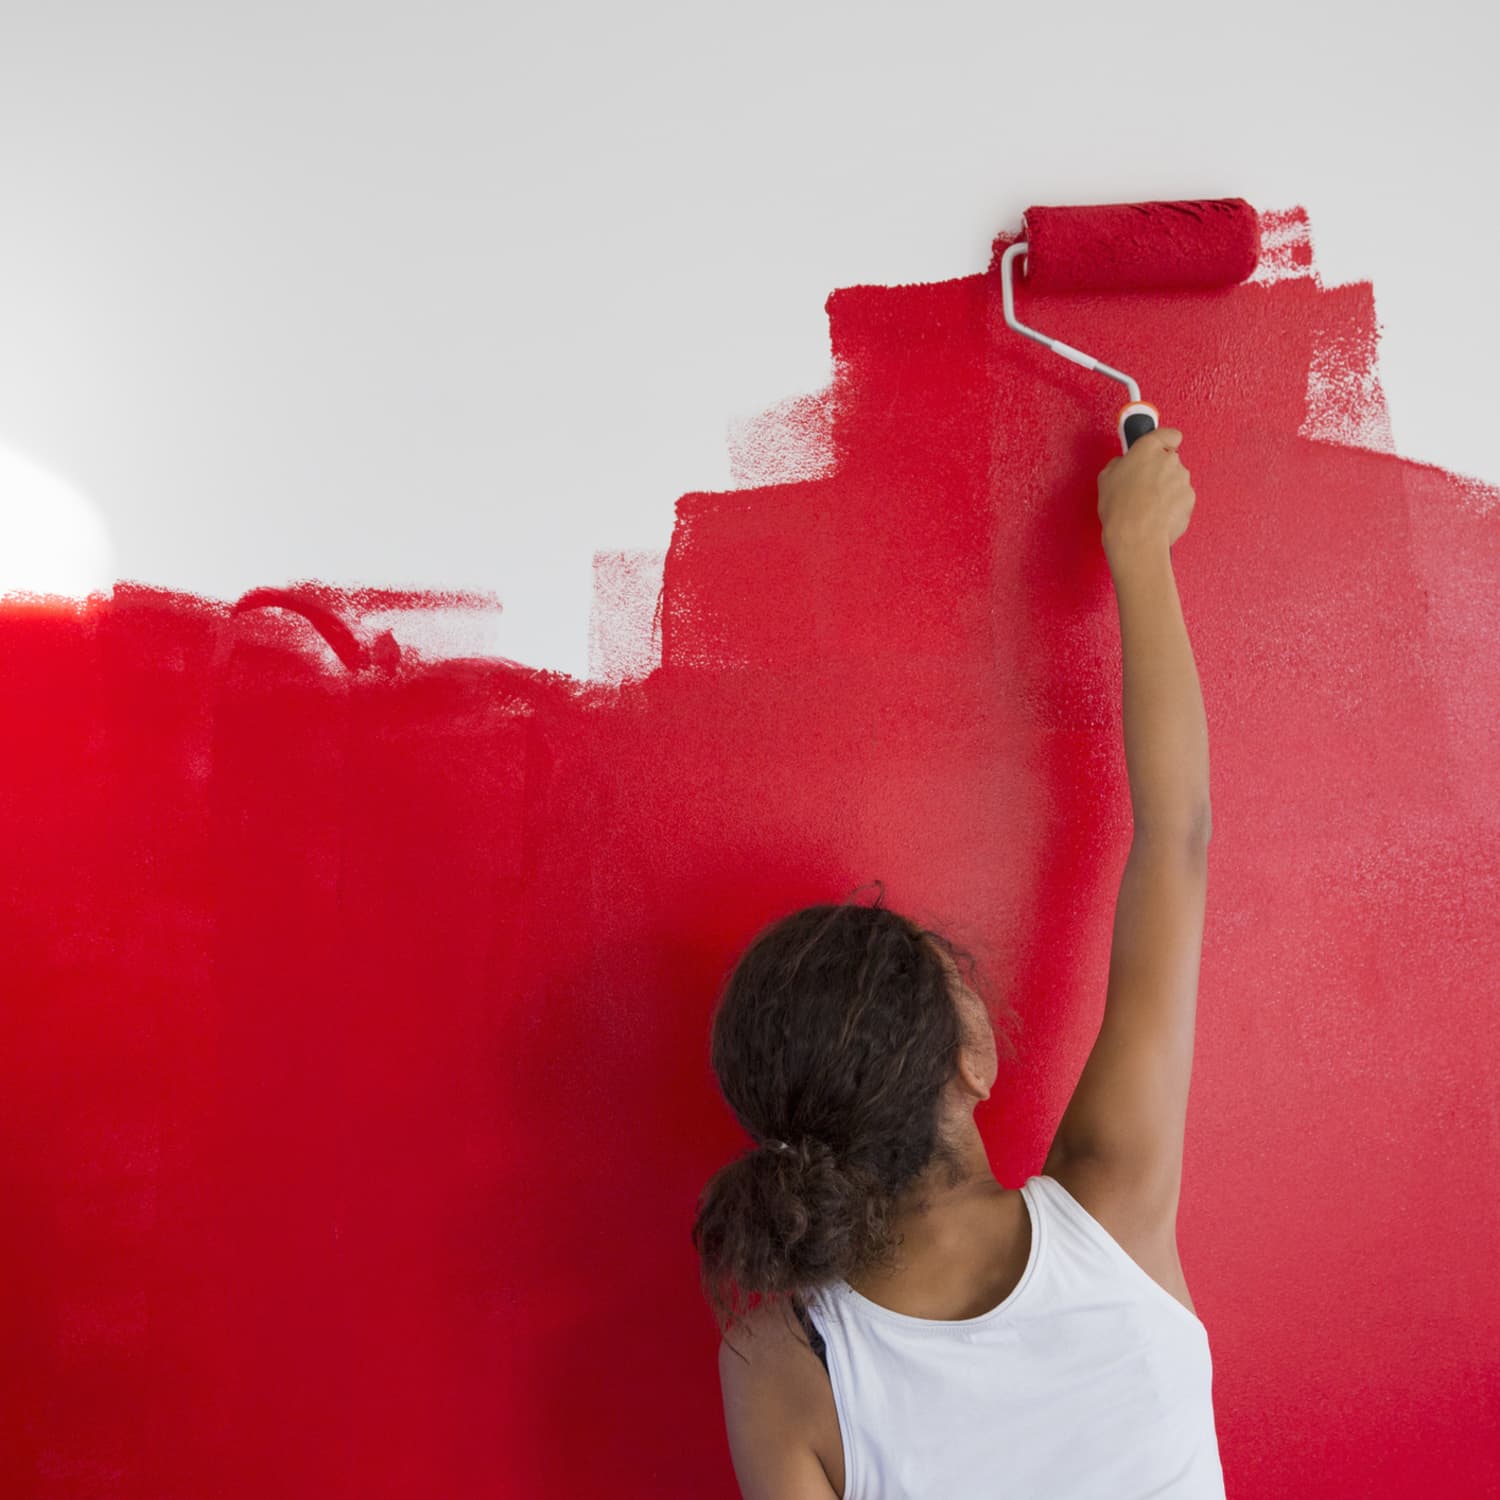 How To Make Paint Dry Faster: 5 Tips From Professional Painters